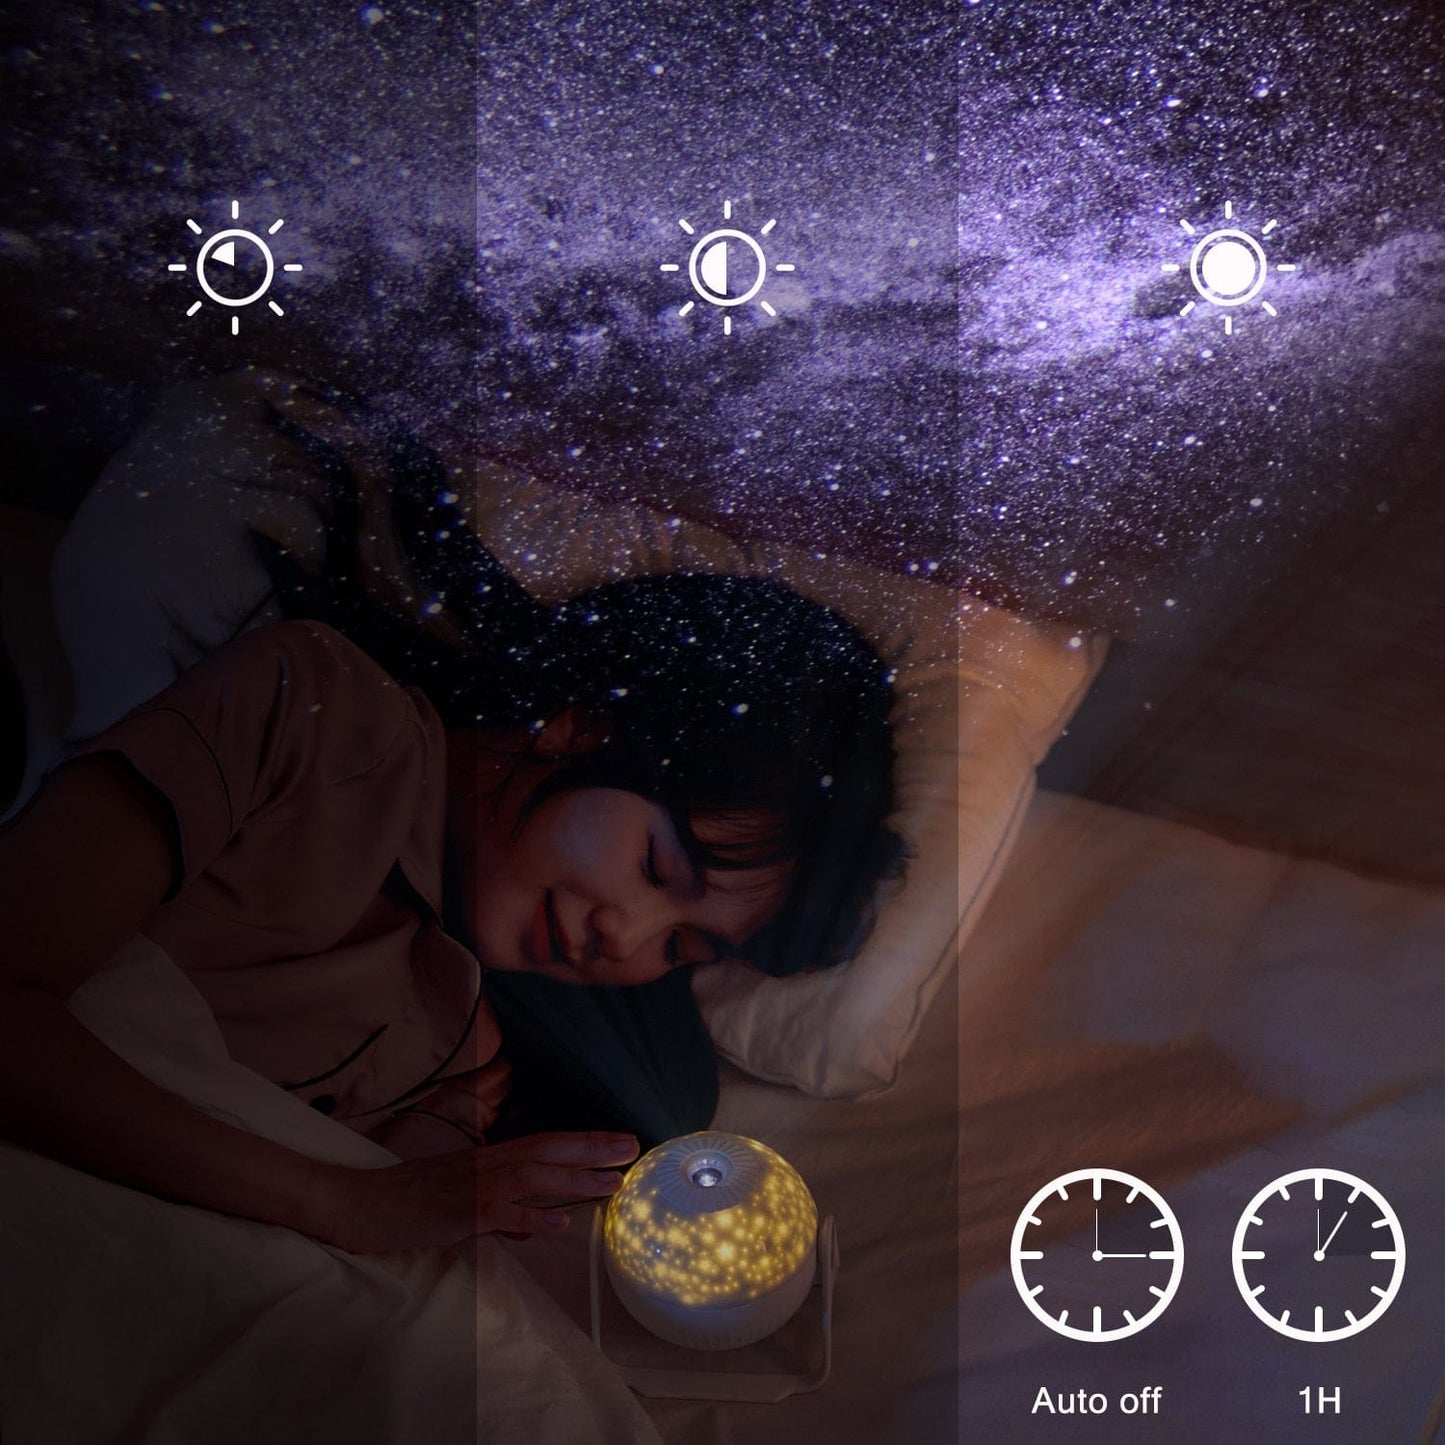 Surprise your friends and family with the Planetarium Projector 2.0